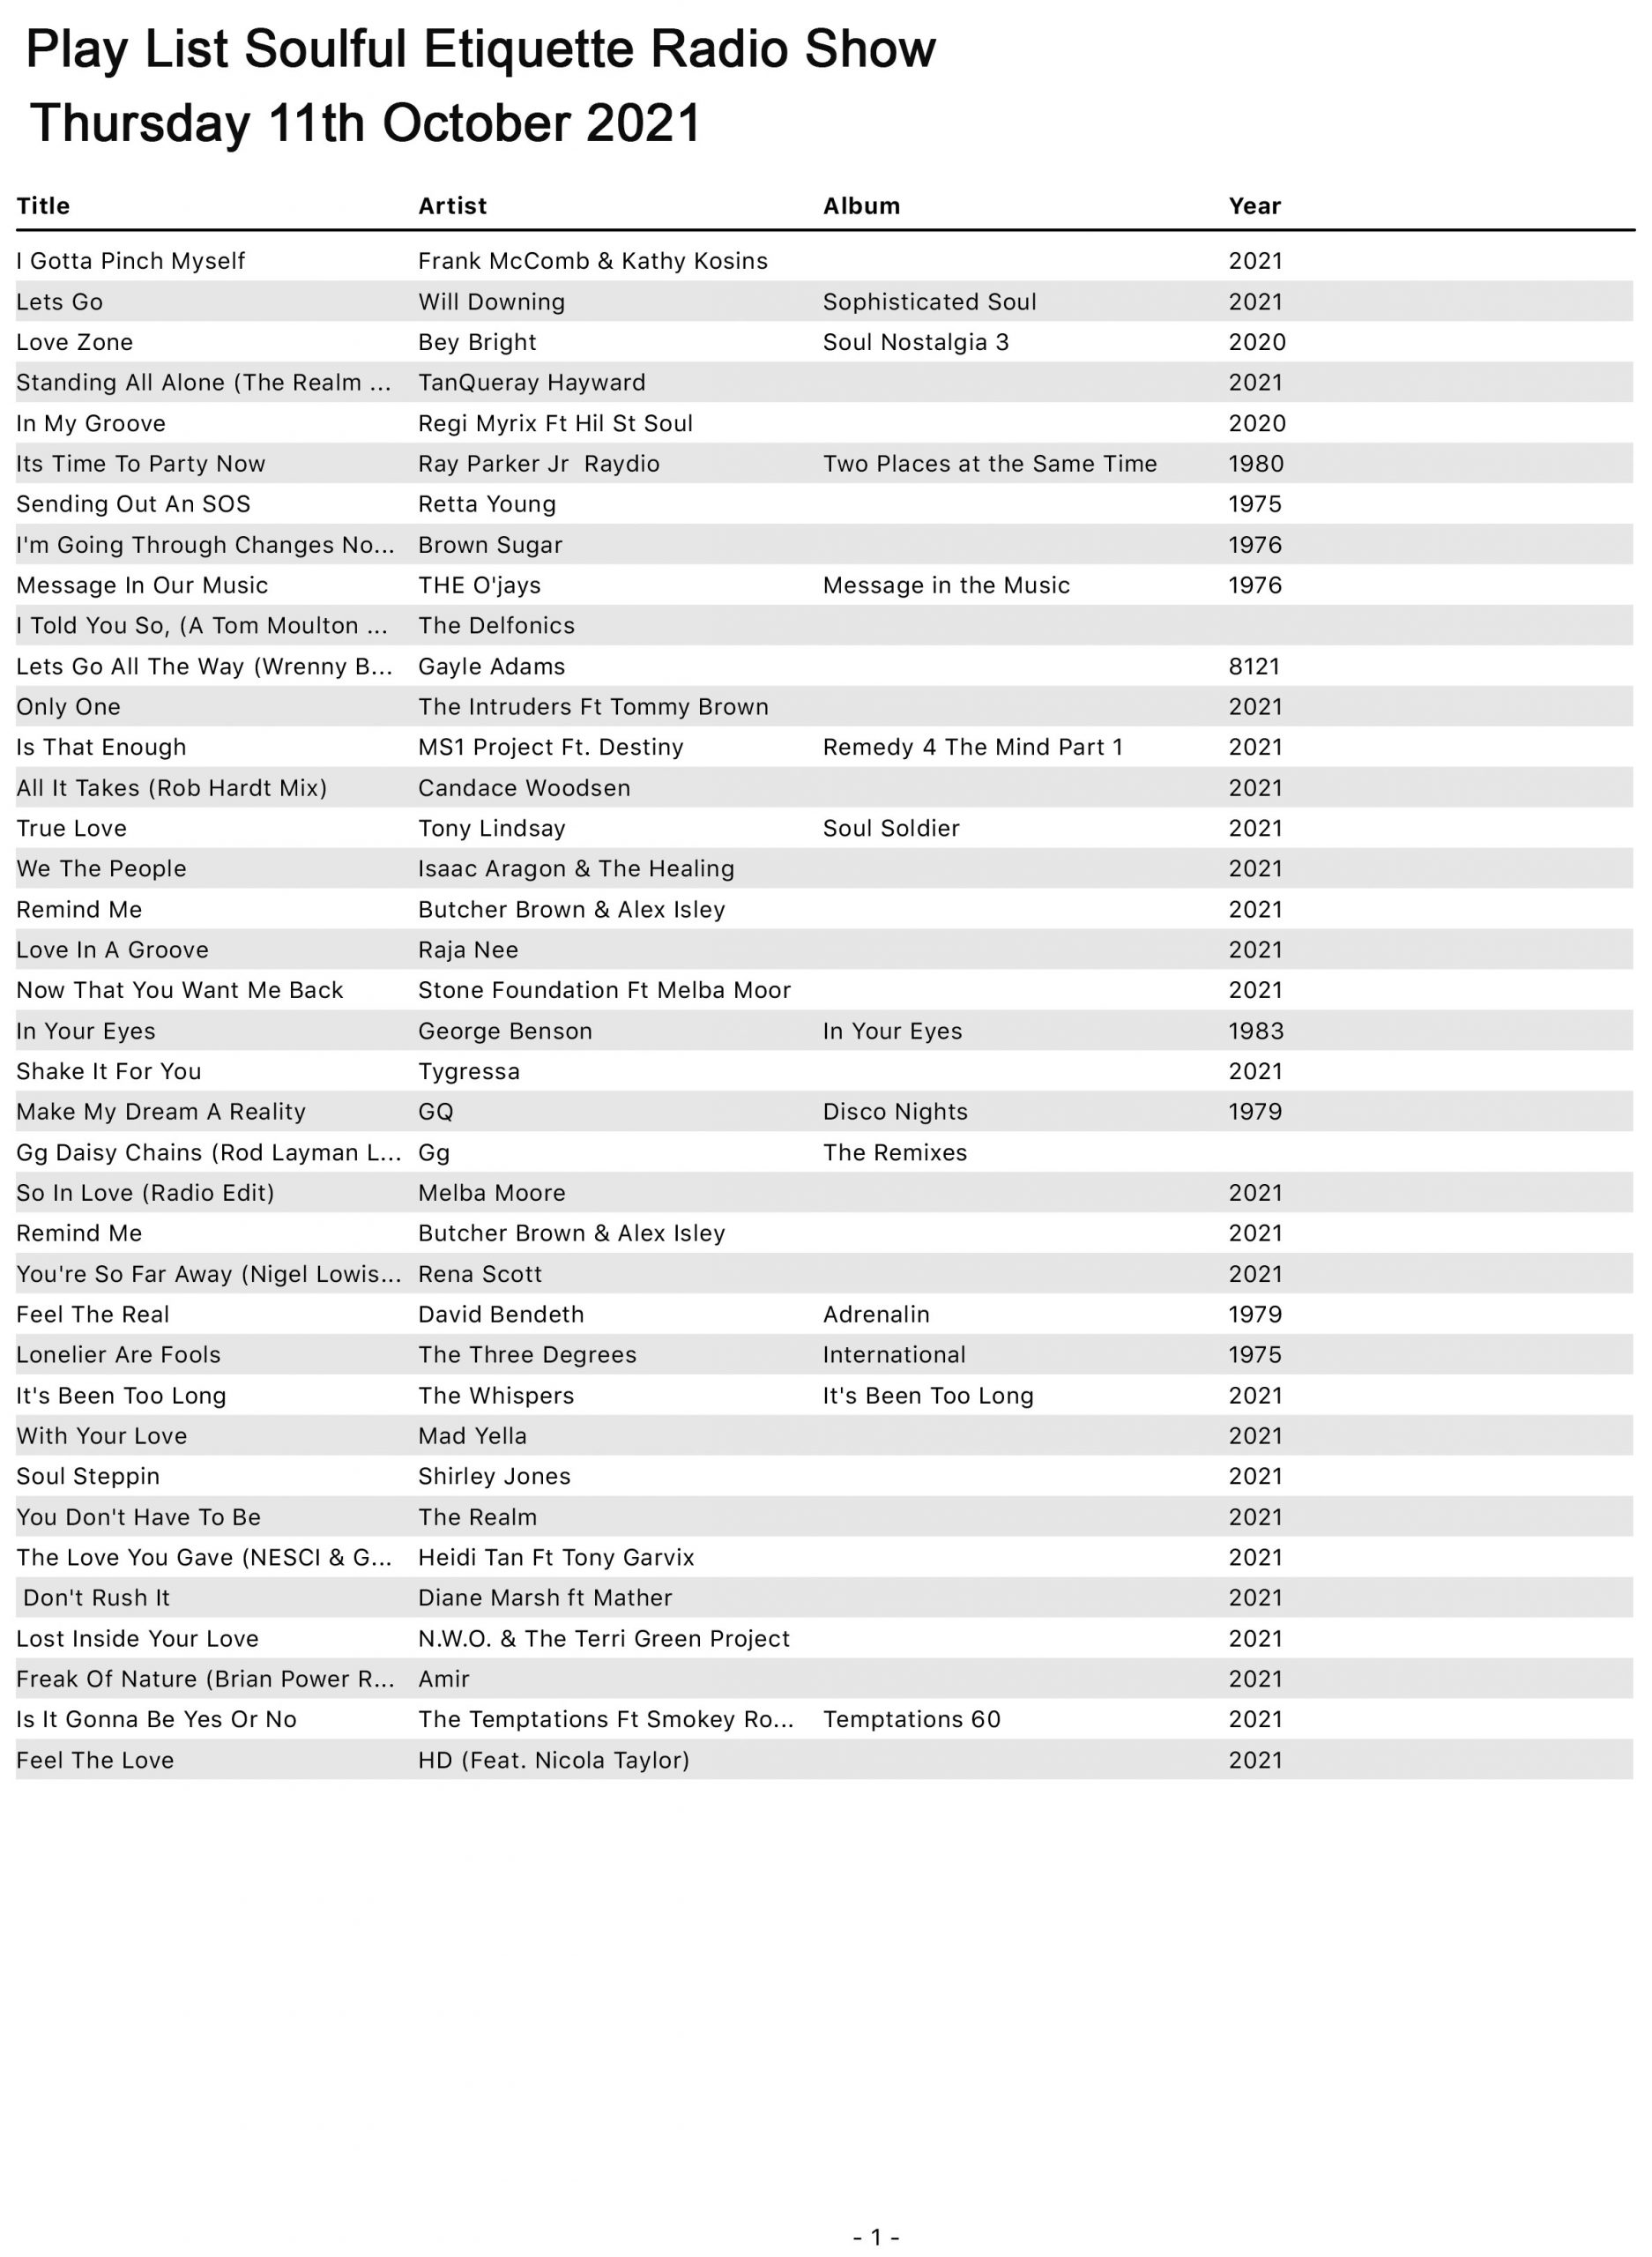 Play List 11th October 2021 Soulful-Etiquette Soul Radio Show